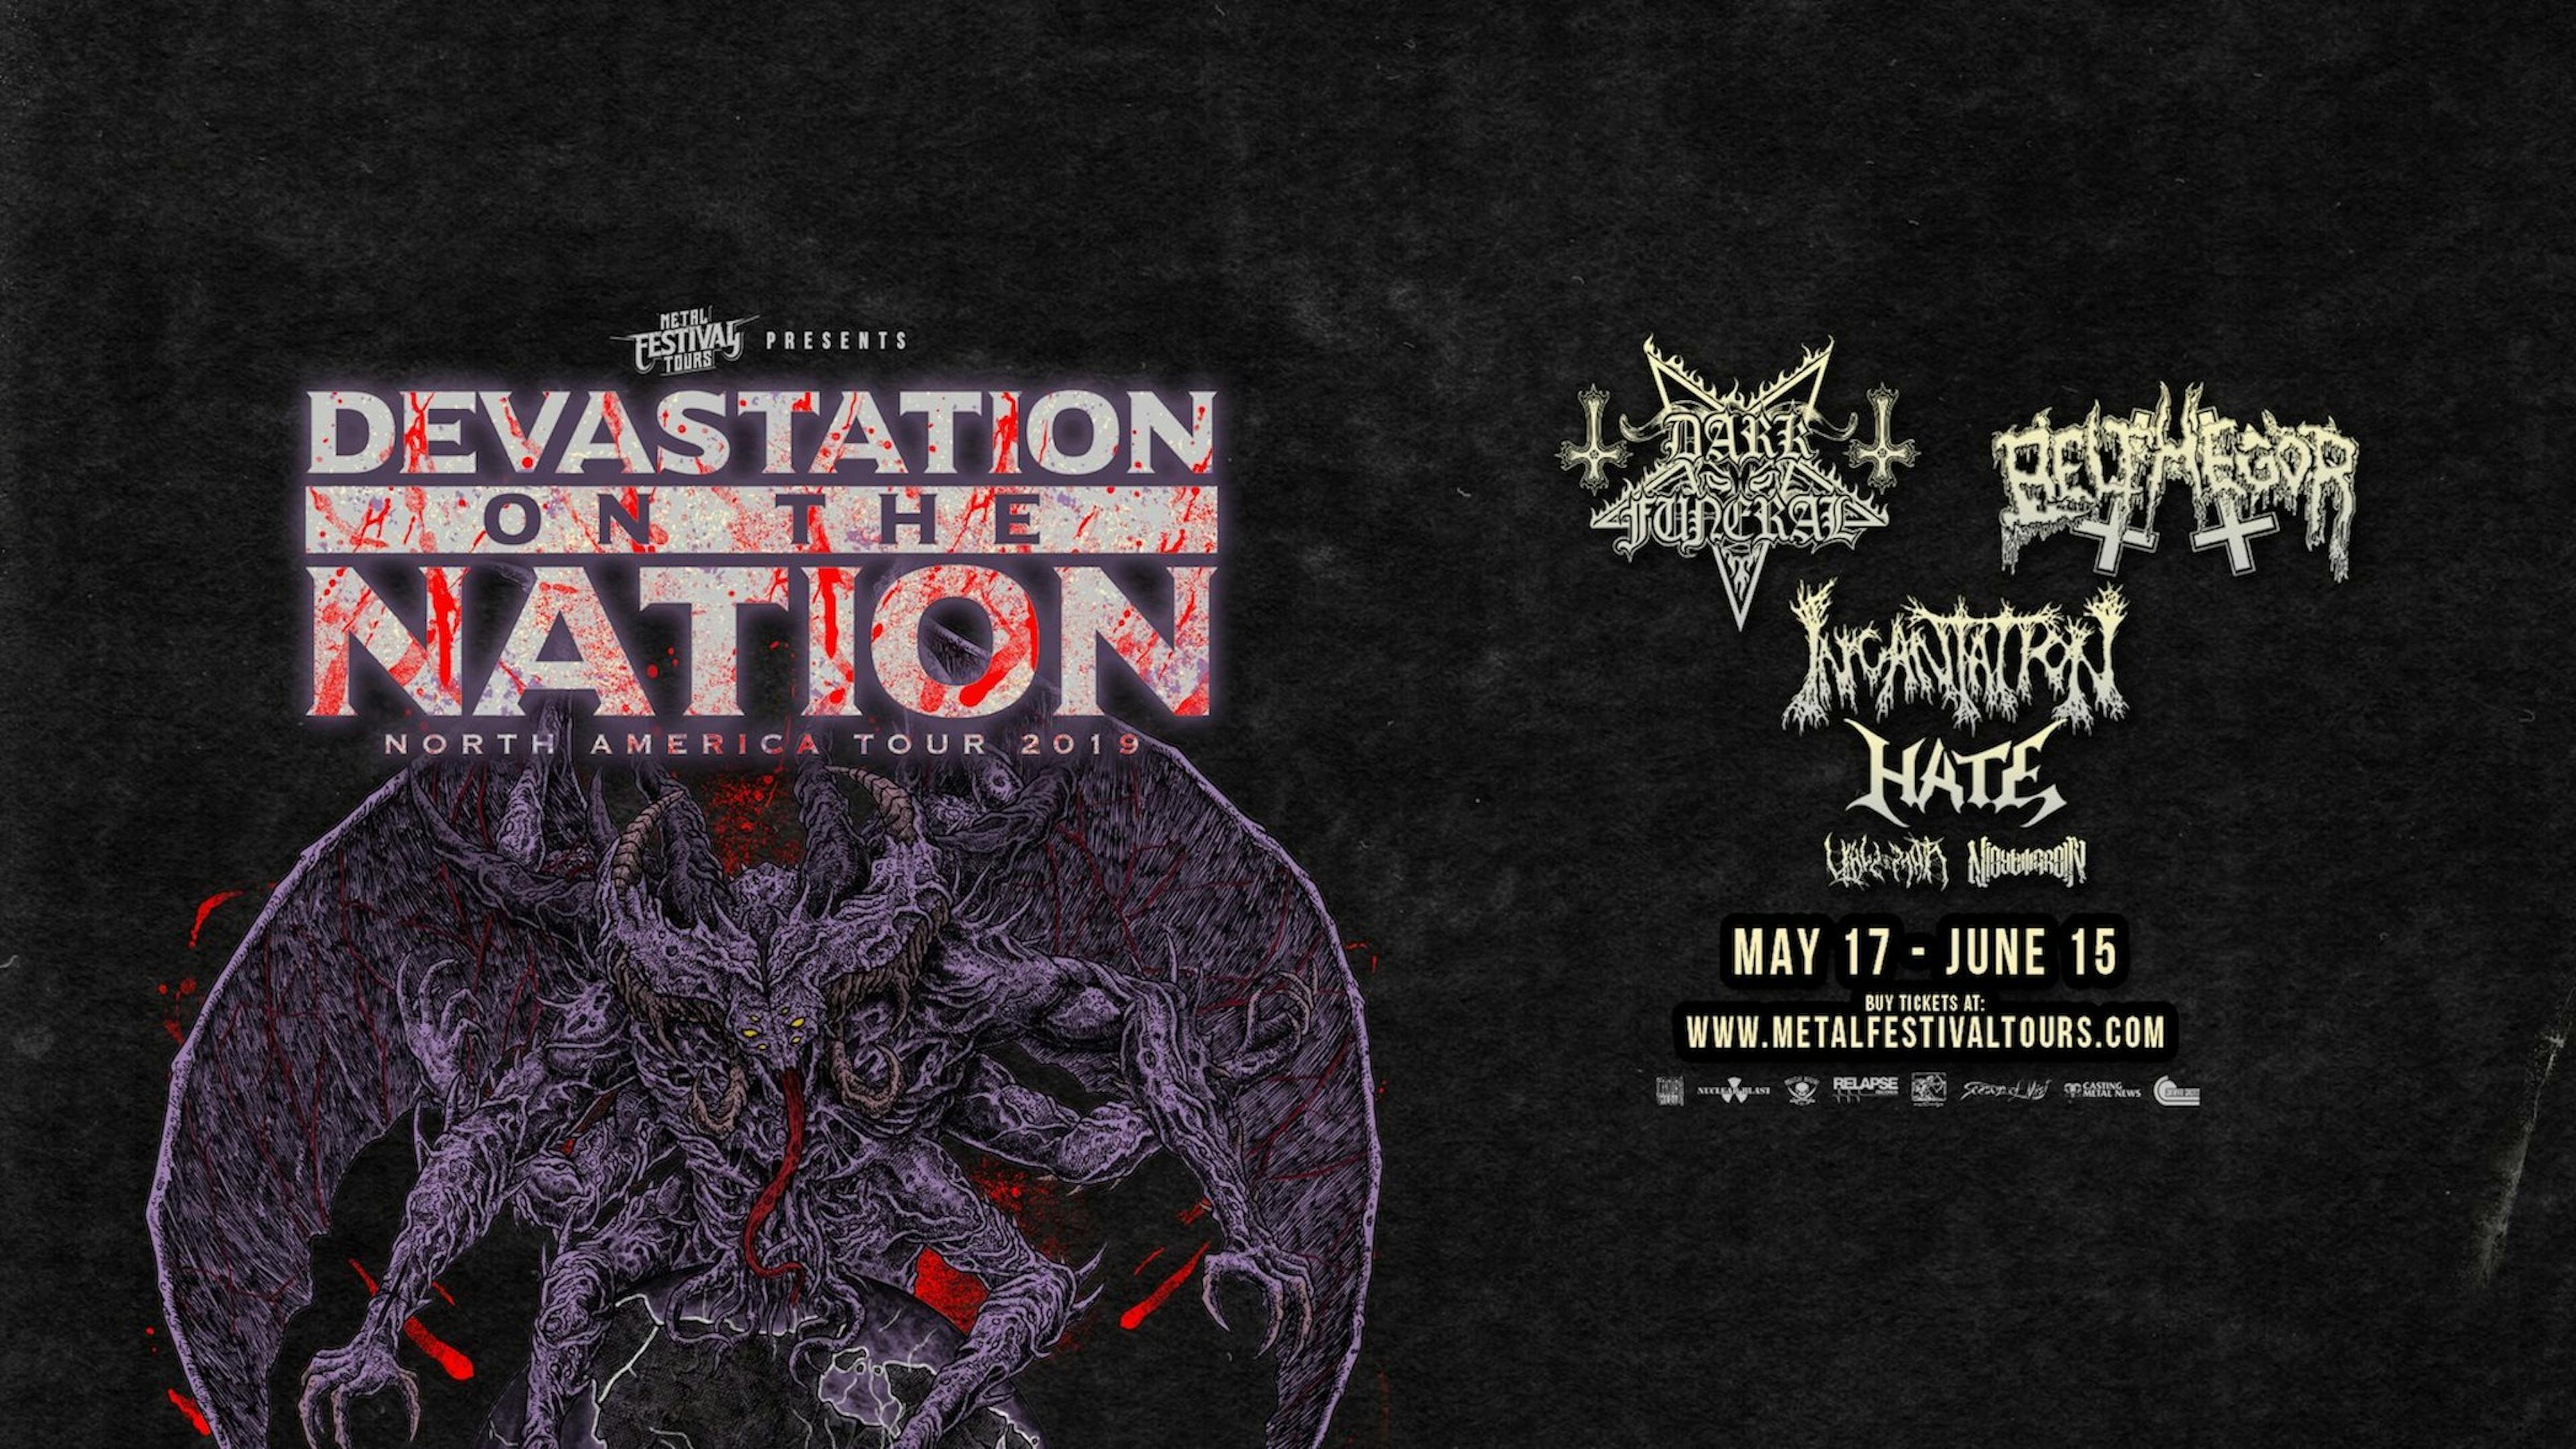 Belphegor And Dark Funeral Announce North American Co-Headlining Tour